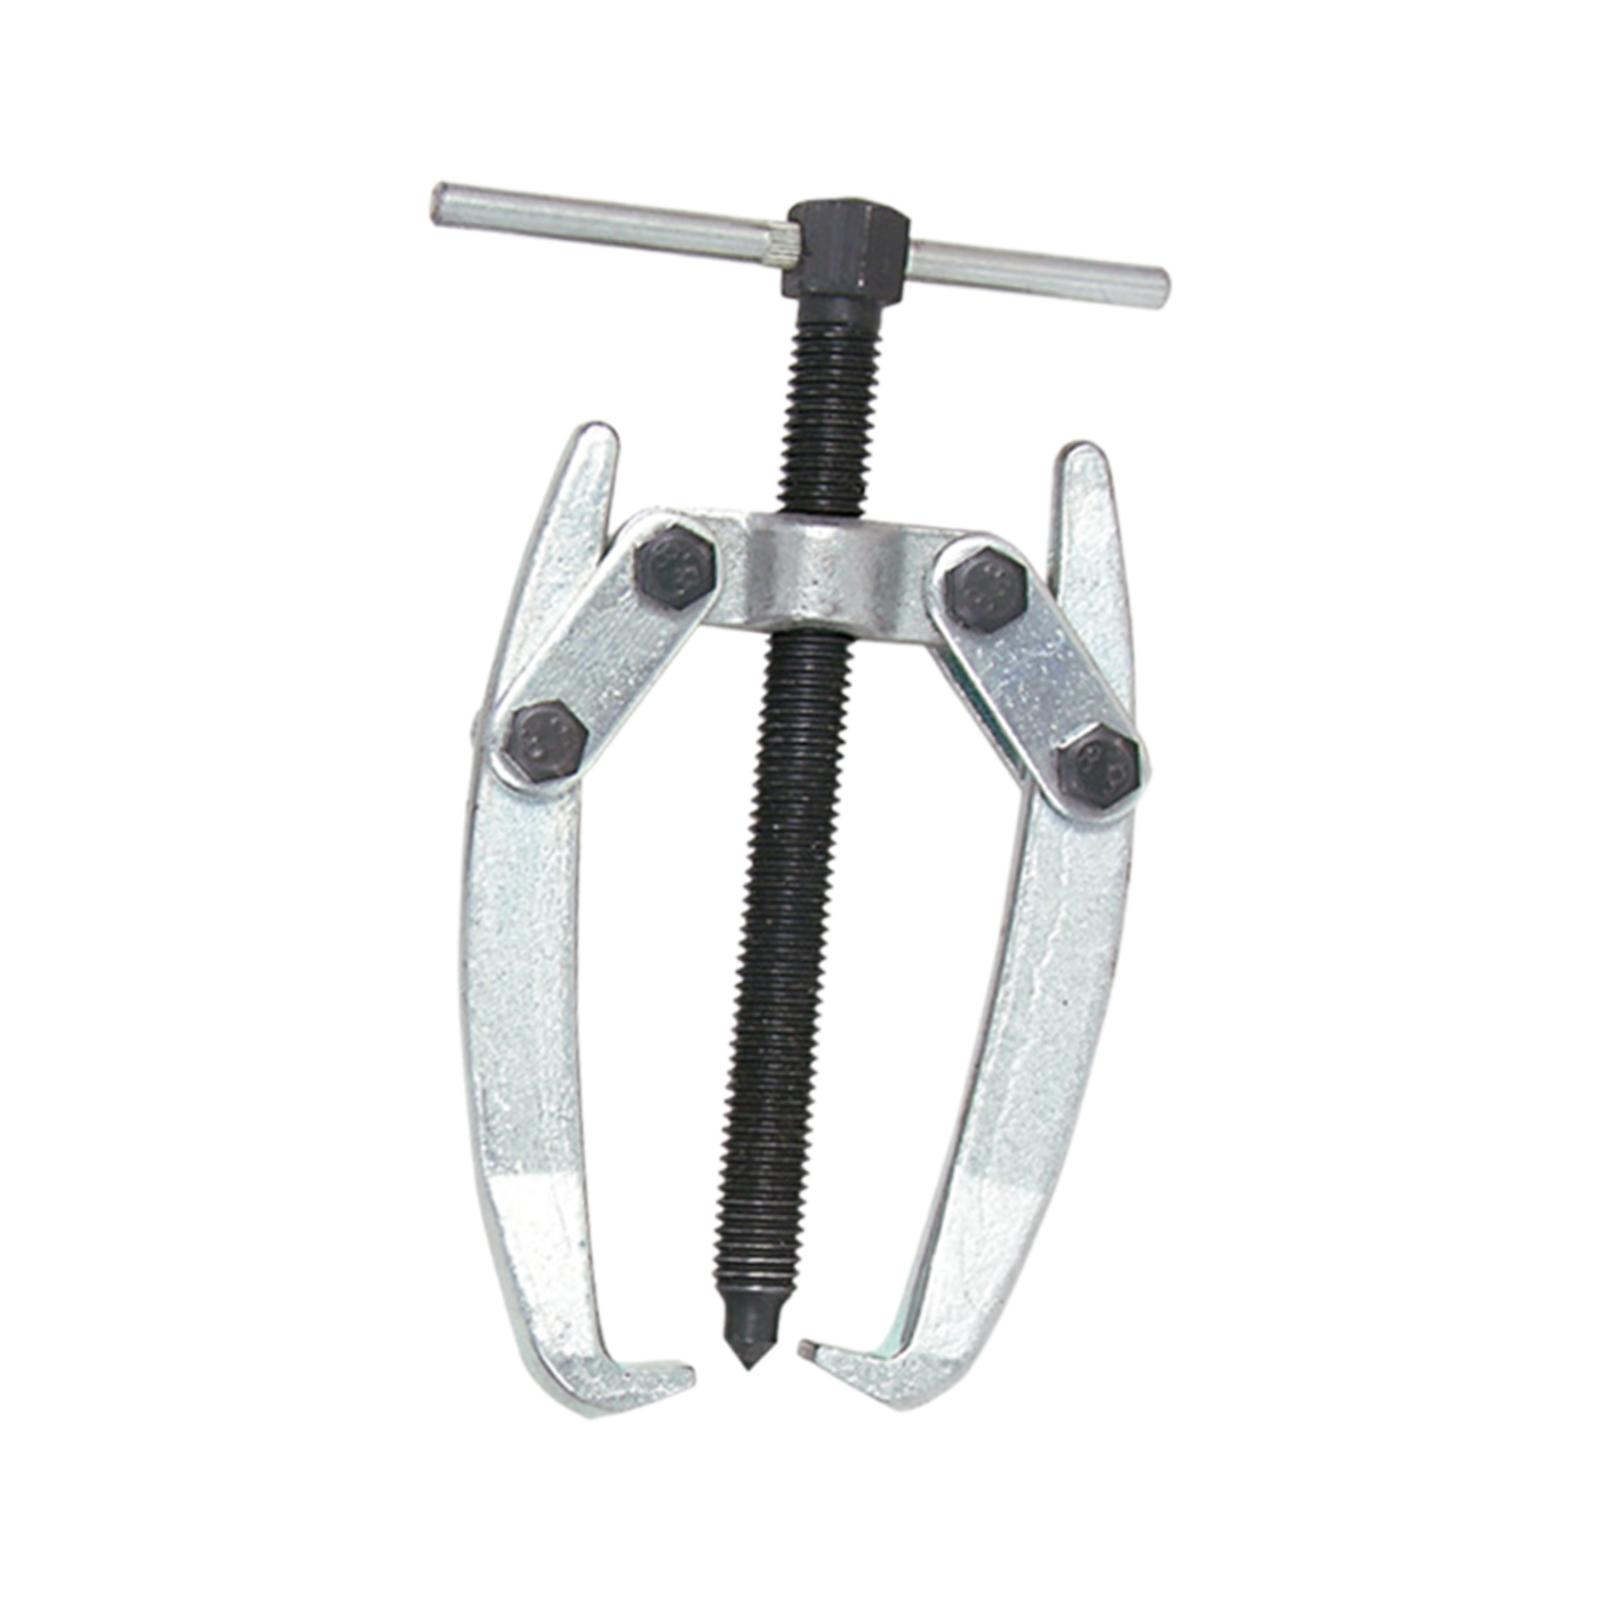 Bearing Gears Puller Jaw Puller Professional Accessories Pump Pulley Remover 2 Jaws 10 to 65mm